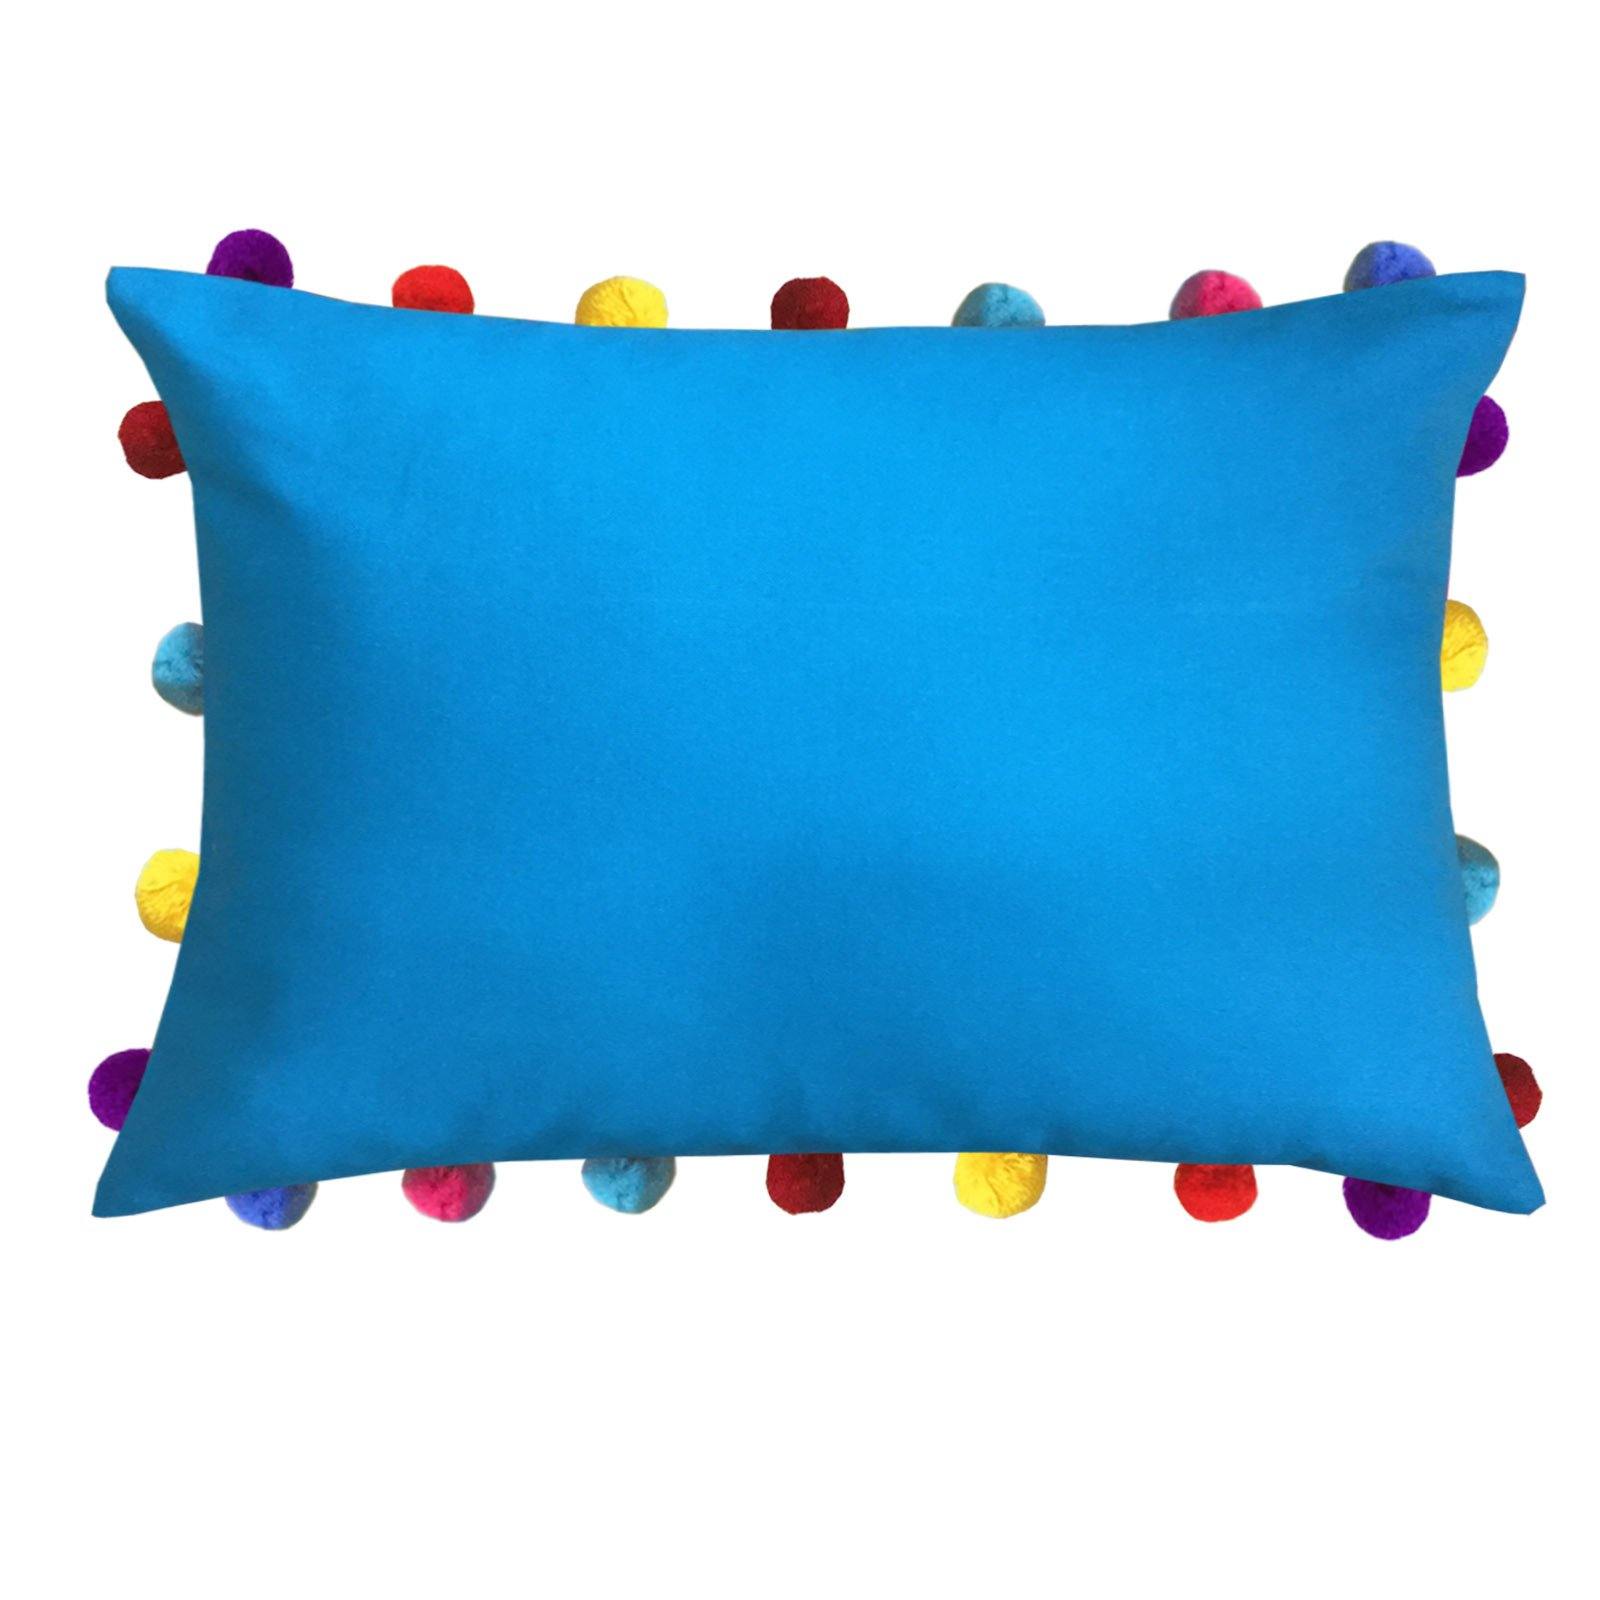 Lushomes Blue Sofa Cushion Cover Online with Colorful Pom Pom (Pack of 1 pc, 14 x 20 inches) - Lushomes